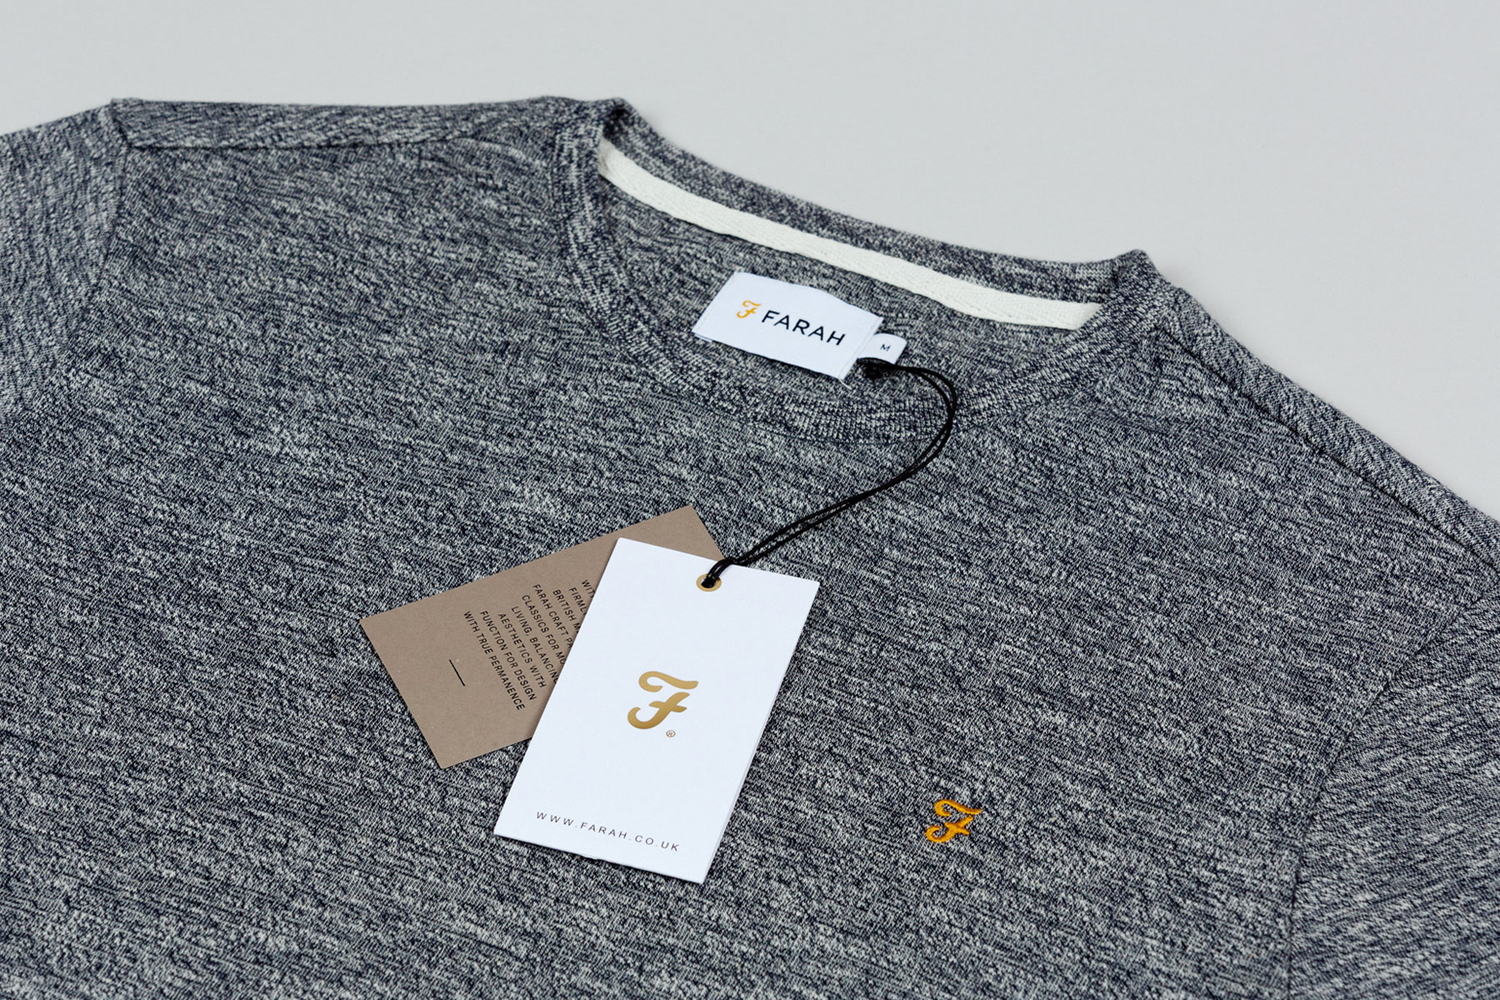 Brand identity, clothing label and tags for men's fashion brand Farah by graphic design studio Post